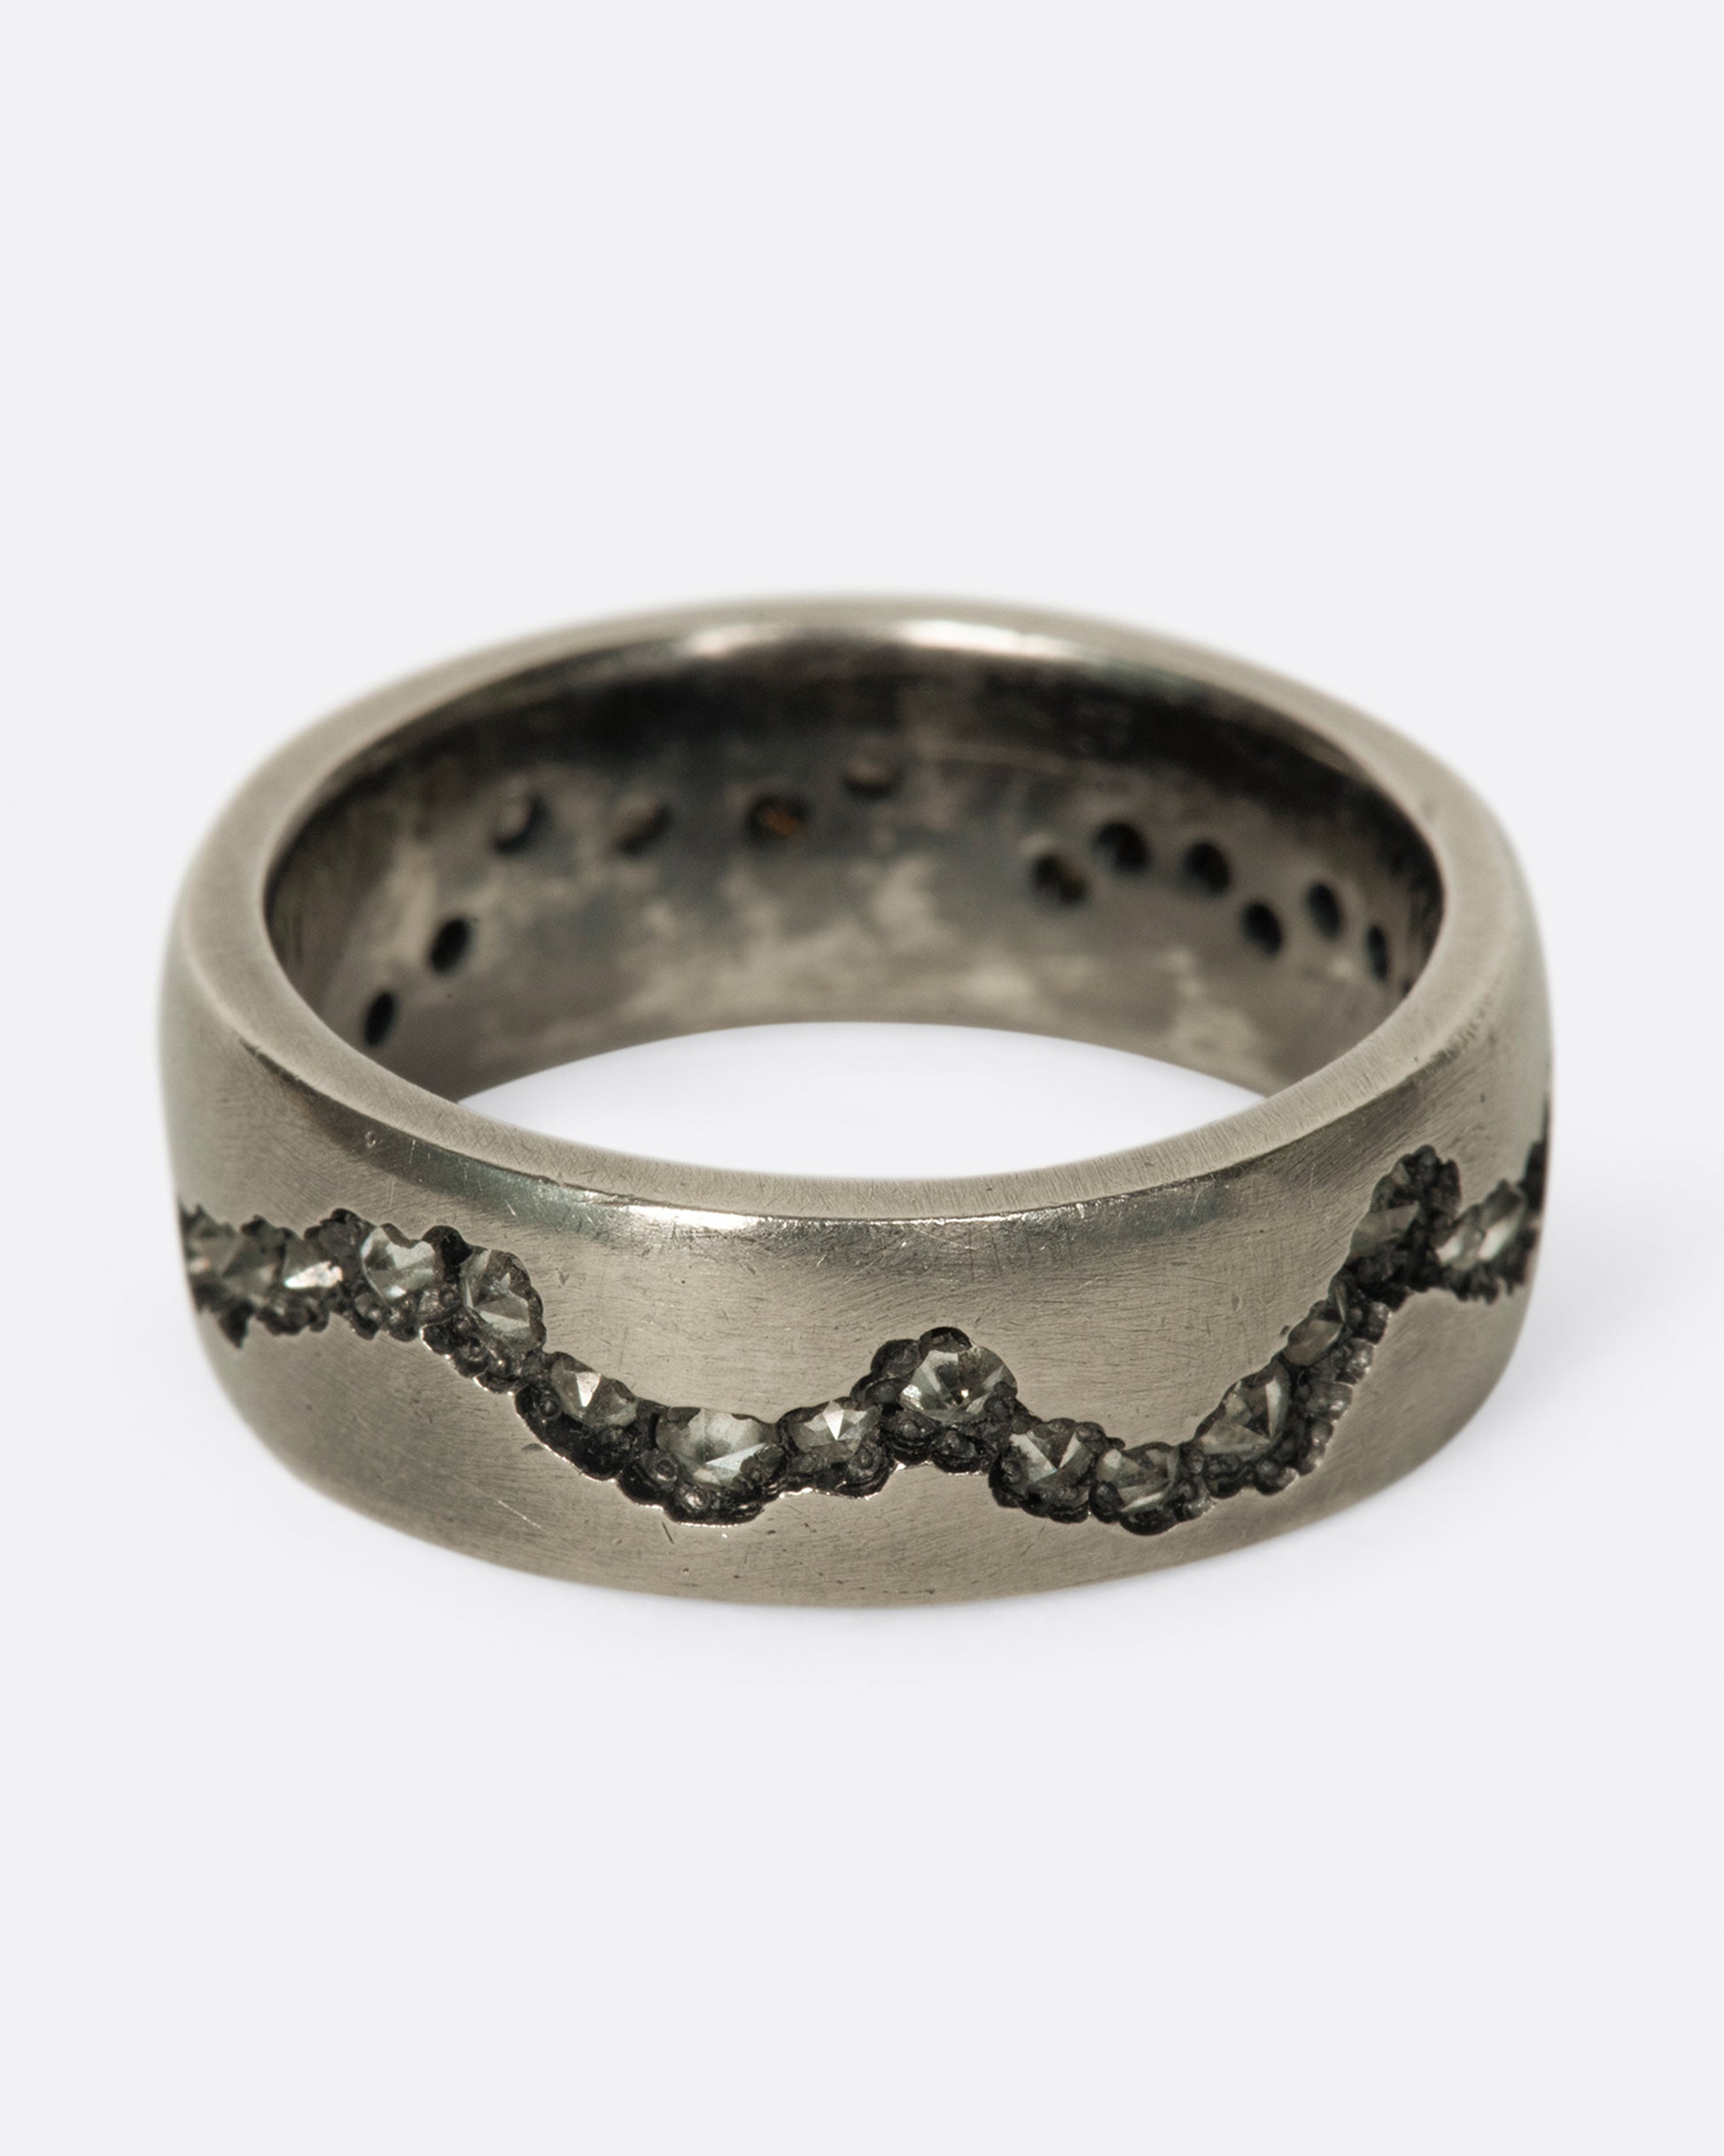 A wide palladium band with inverted diamonds set in a hand cut fissure through the center of the ring.